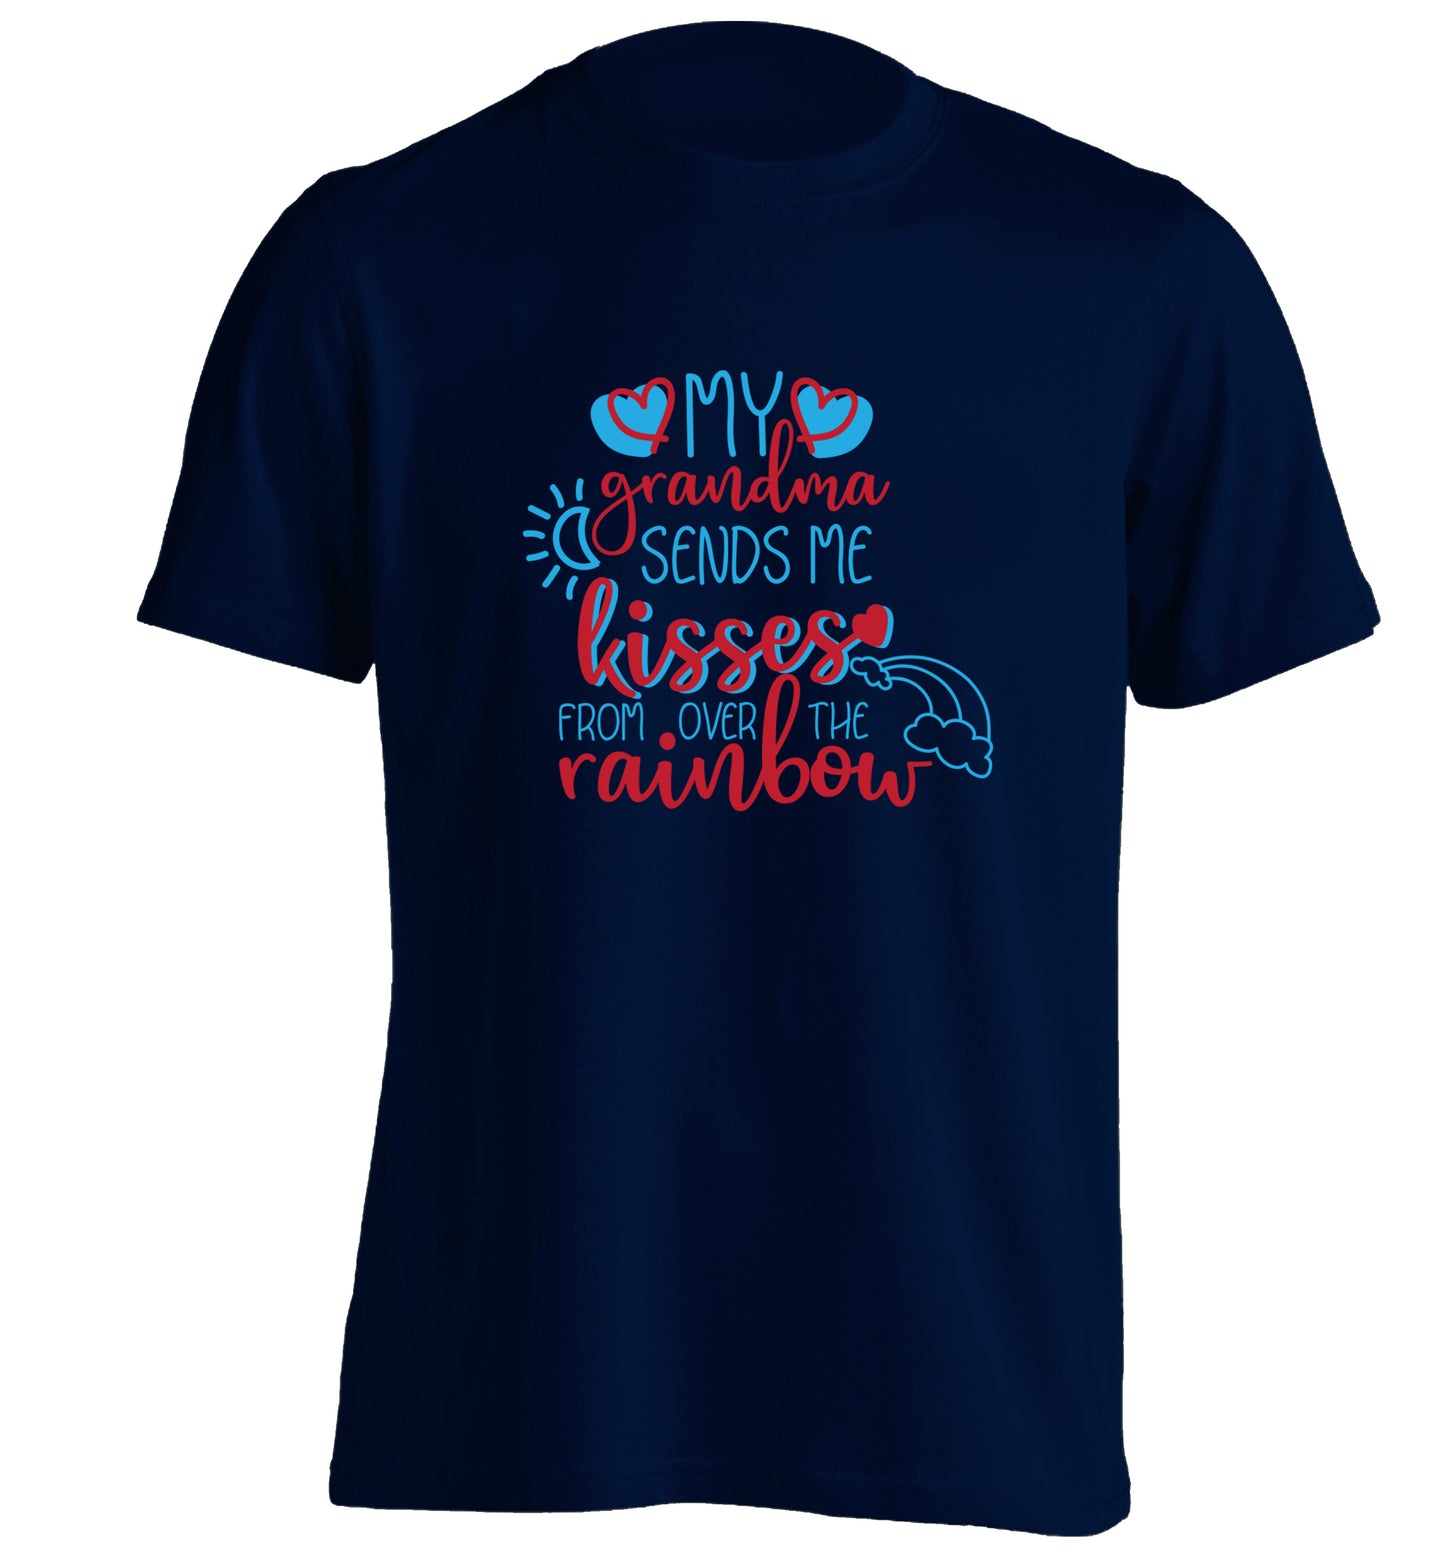 My grandma sends me kisses from over the rainbow adults unisex navy Tshirt 2XL